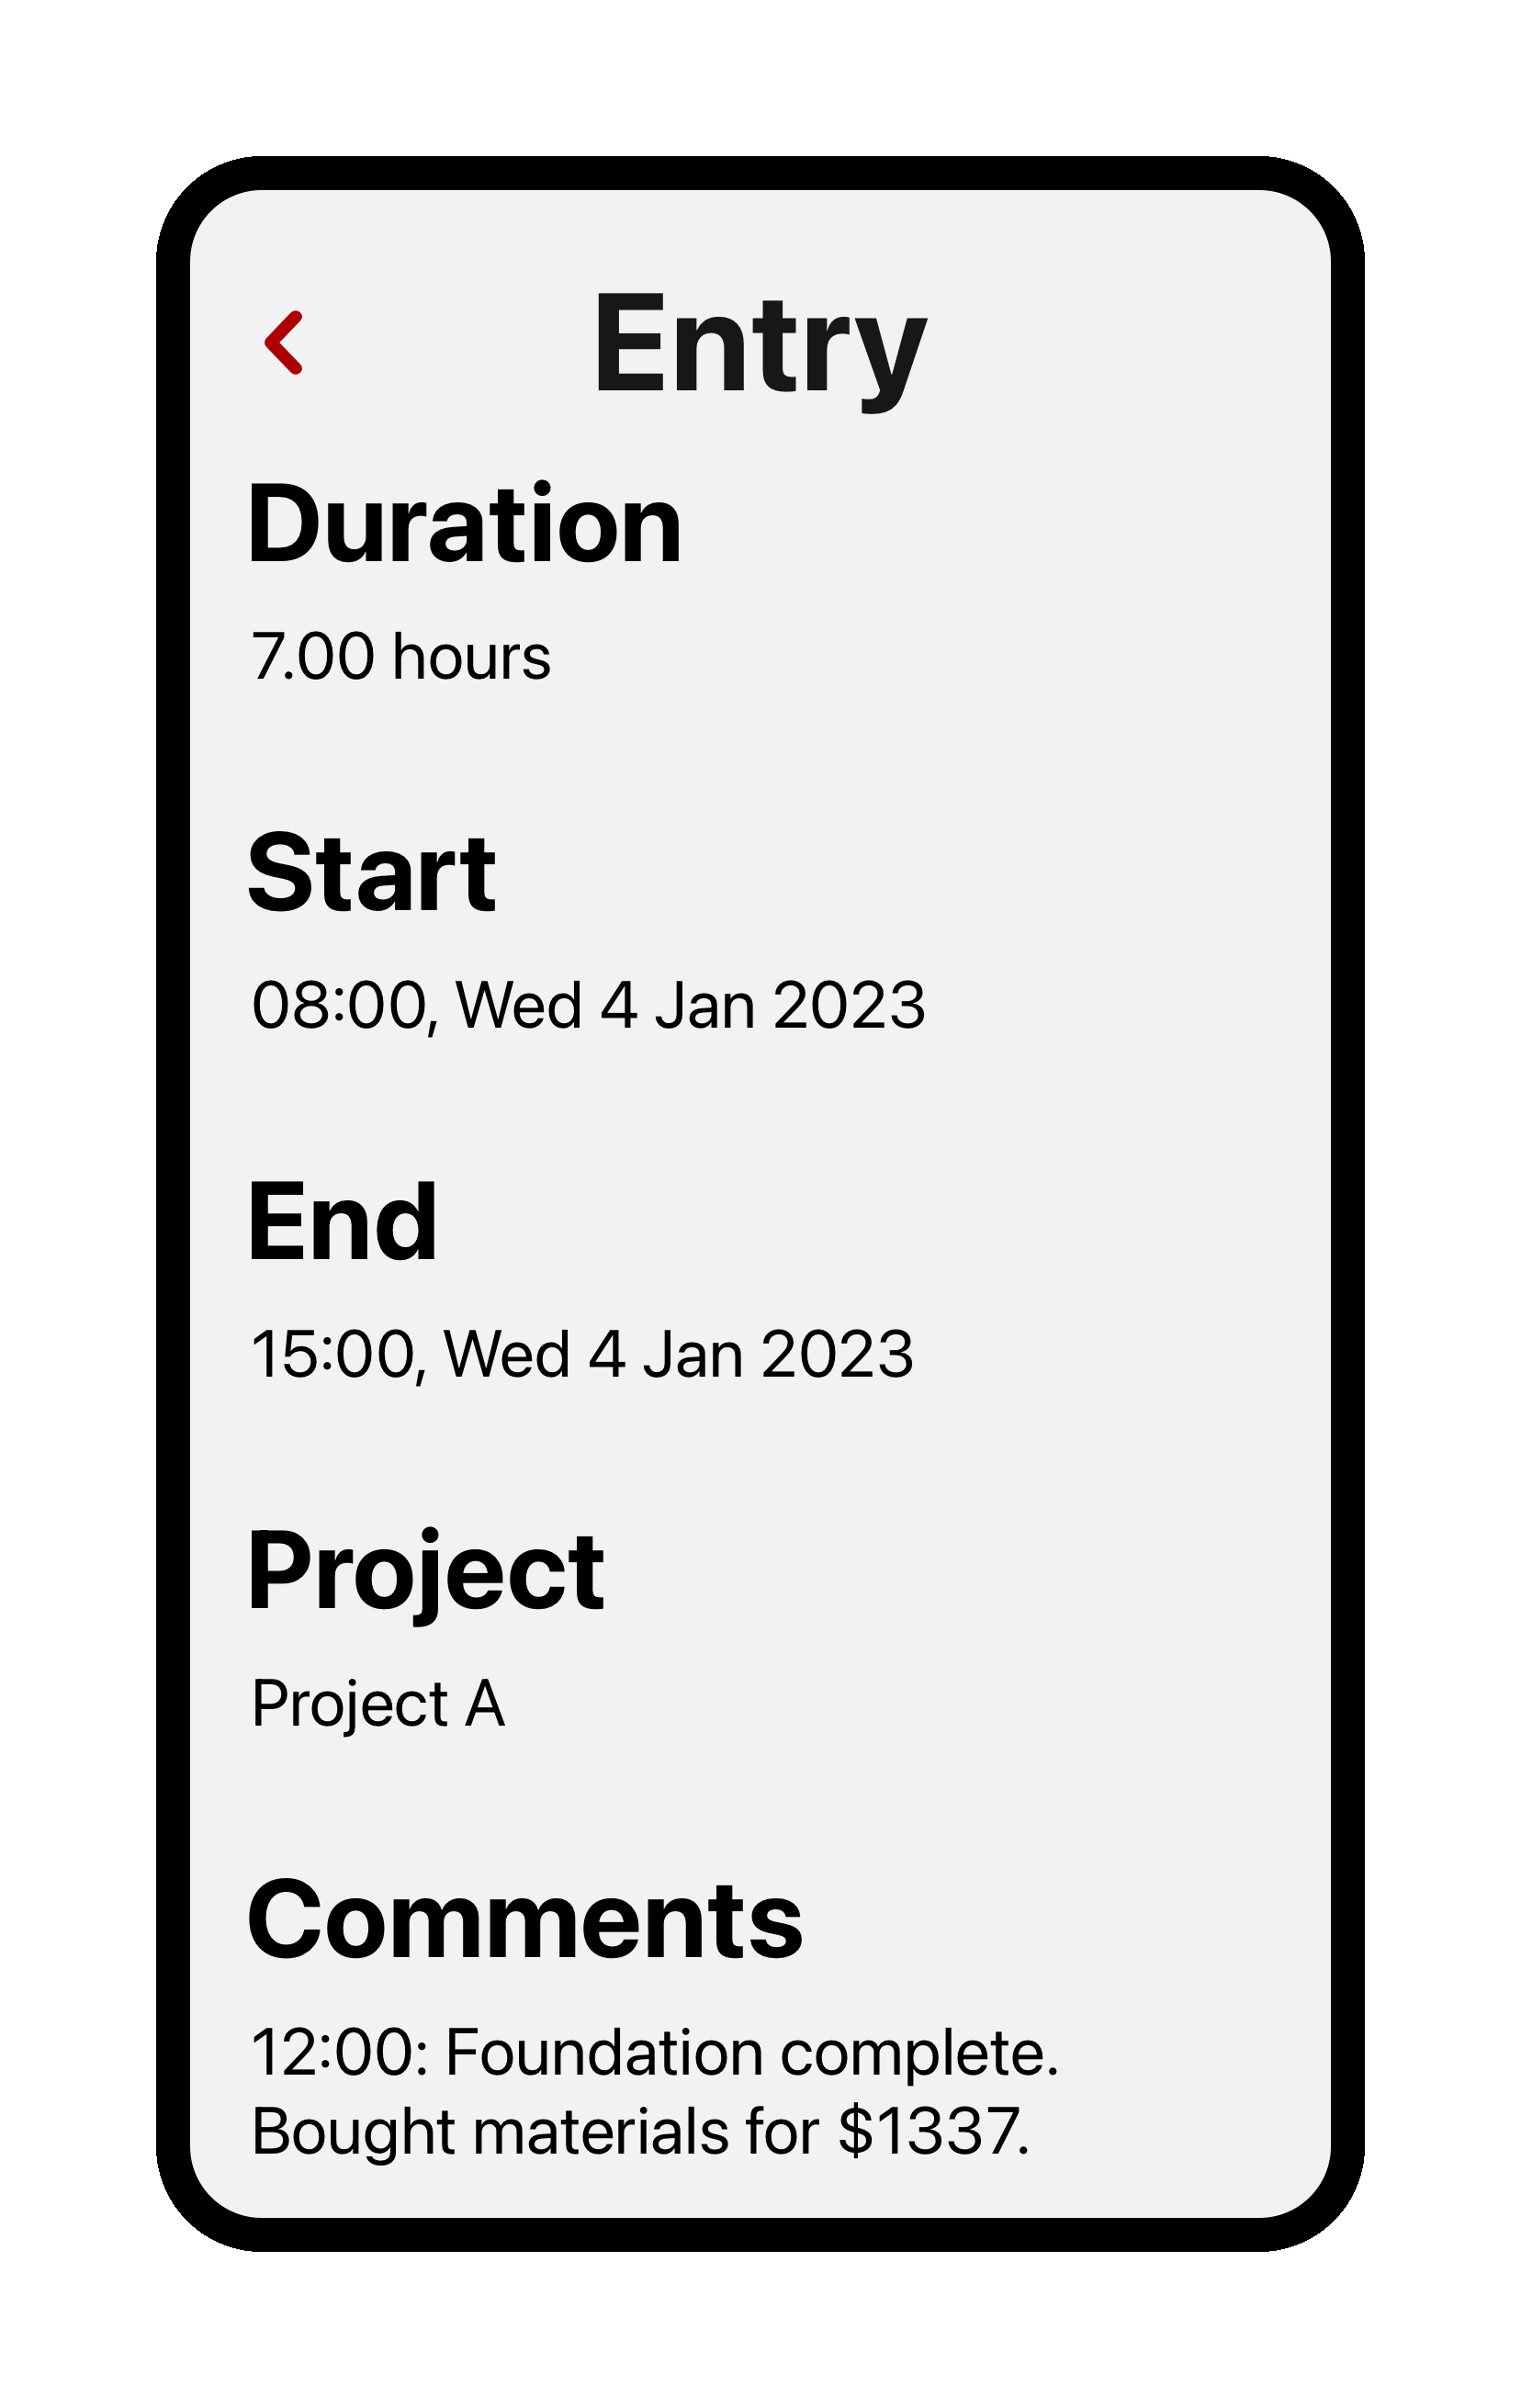 Screenshot of the Tímavera app showing a detail screen of a single time entry. Duration: 7 hours. Start time: 08:00, Wed 4 Jan 2023. End time: 15:00, Wed 4 Jan 2023. Project A. Comments: Foundation complete. Bought materials for $1337.